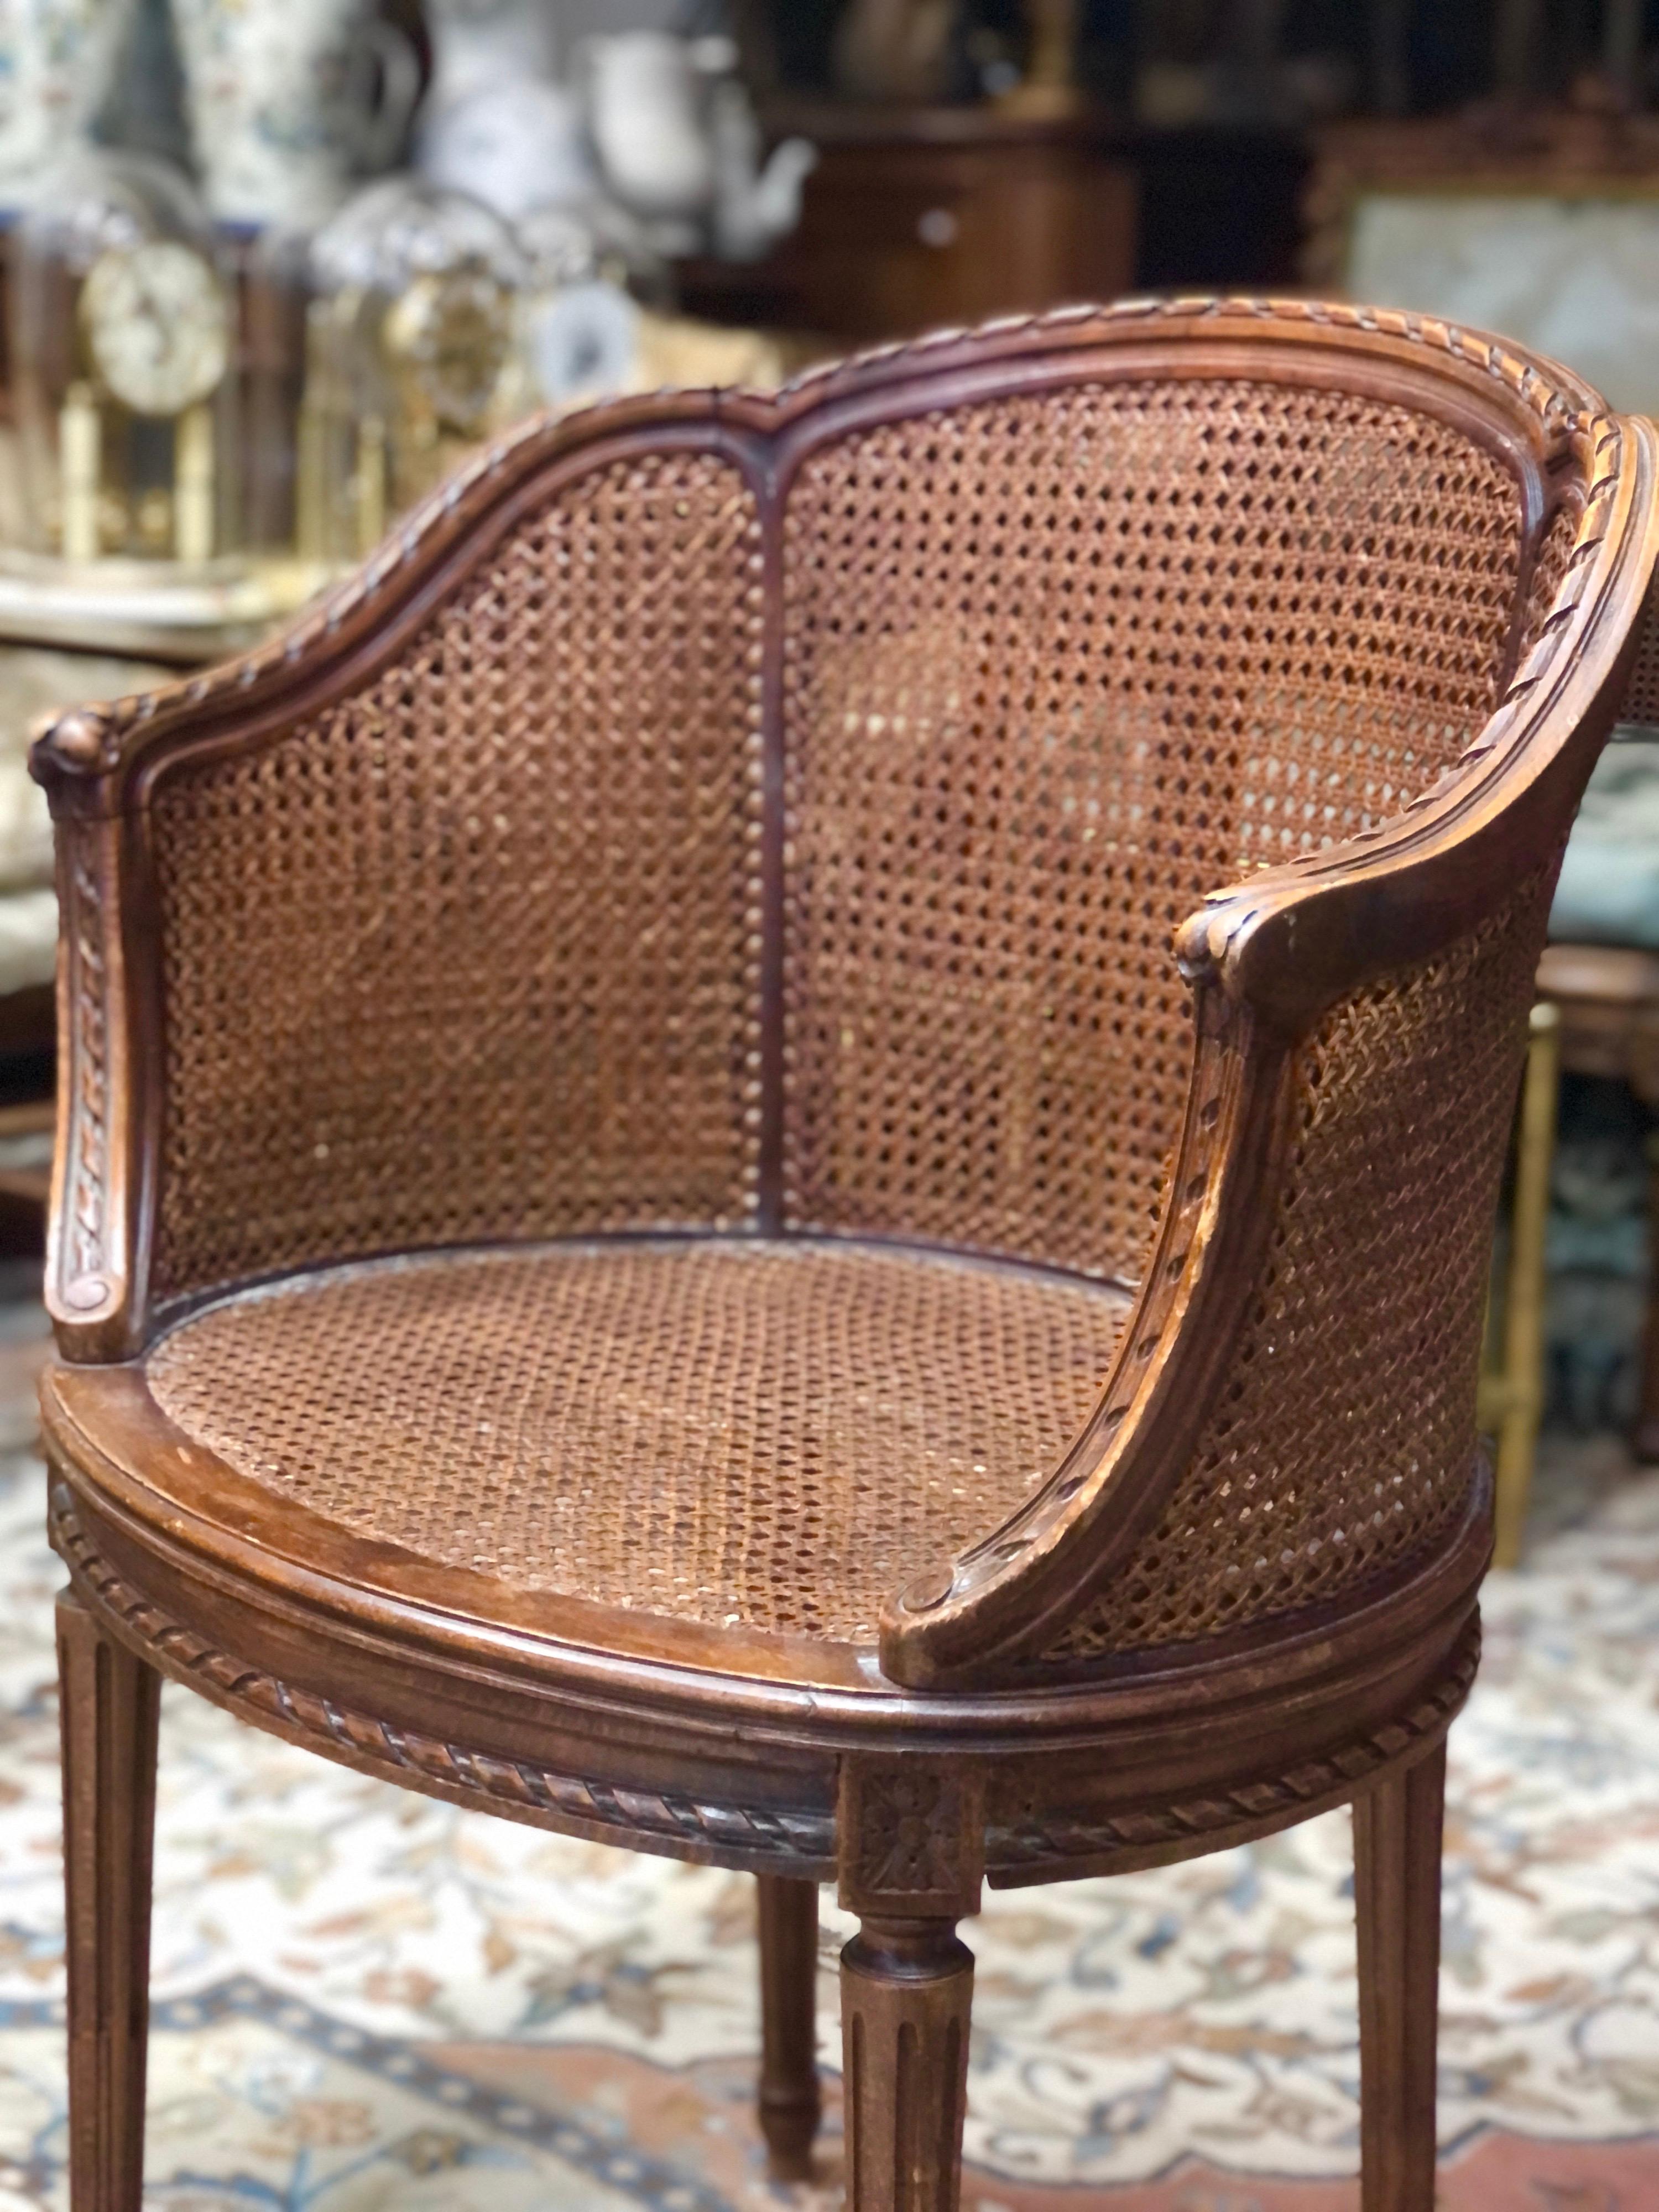 Cane 20th Century Petite French Hand Carved Round Armchair, Louis XVI by Odoul Paris